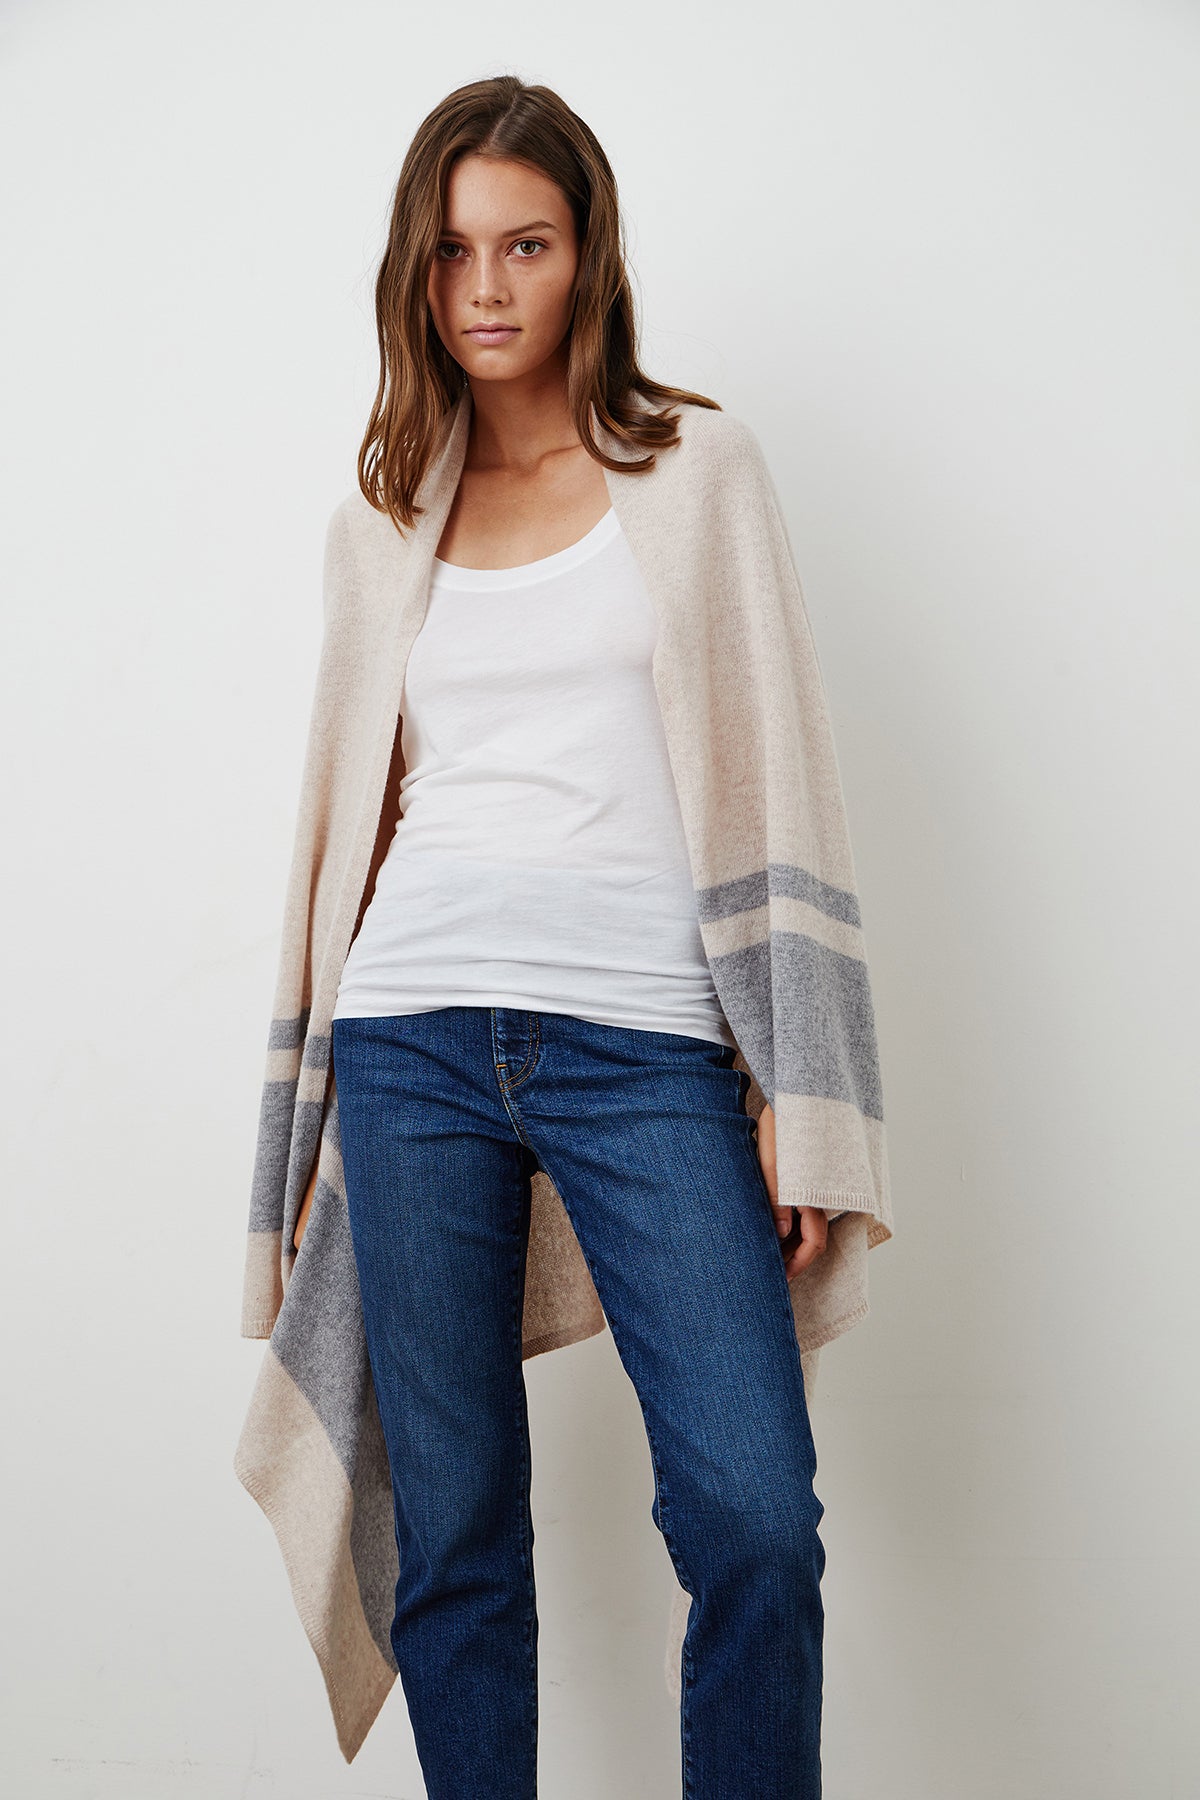   The model is wearing cozy LIV CASHMERE THROW BLANKET jeans and a beige striped cardigan from Jenny Graham Home. 